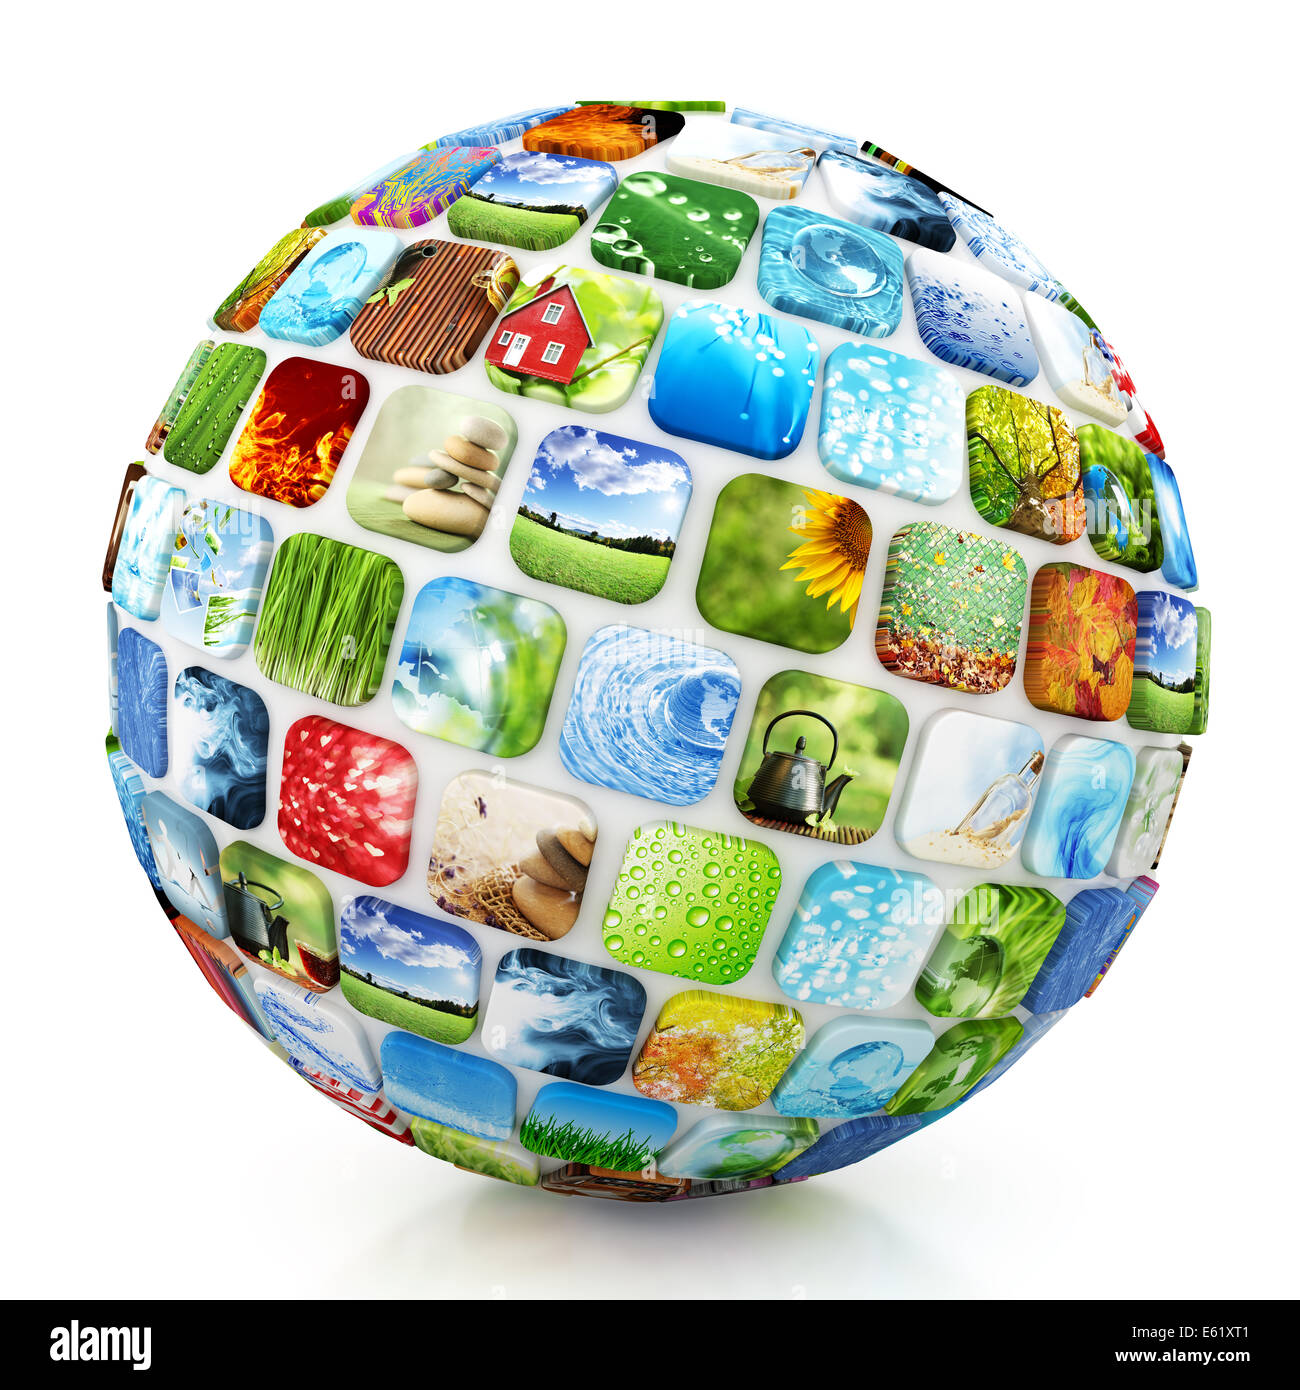 Sphere of colorful images Stock Photo